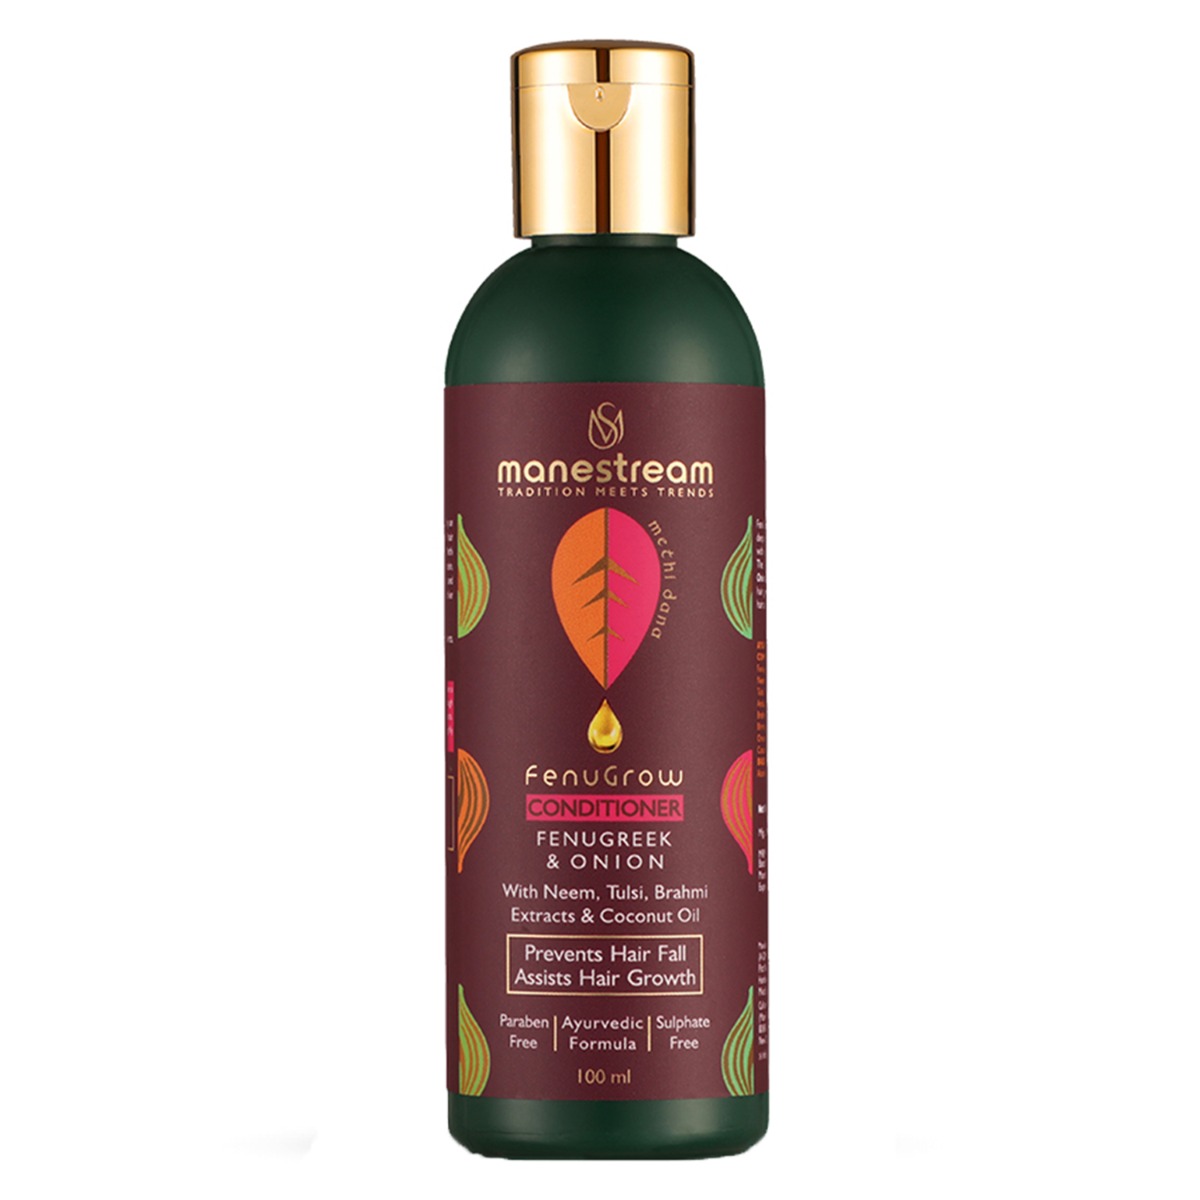 Manestream Fenugrow Ayurvedic Conditioner with Fenugreek and Onion for Hair Fall Control, For Smooth Hair, 100ml